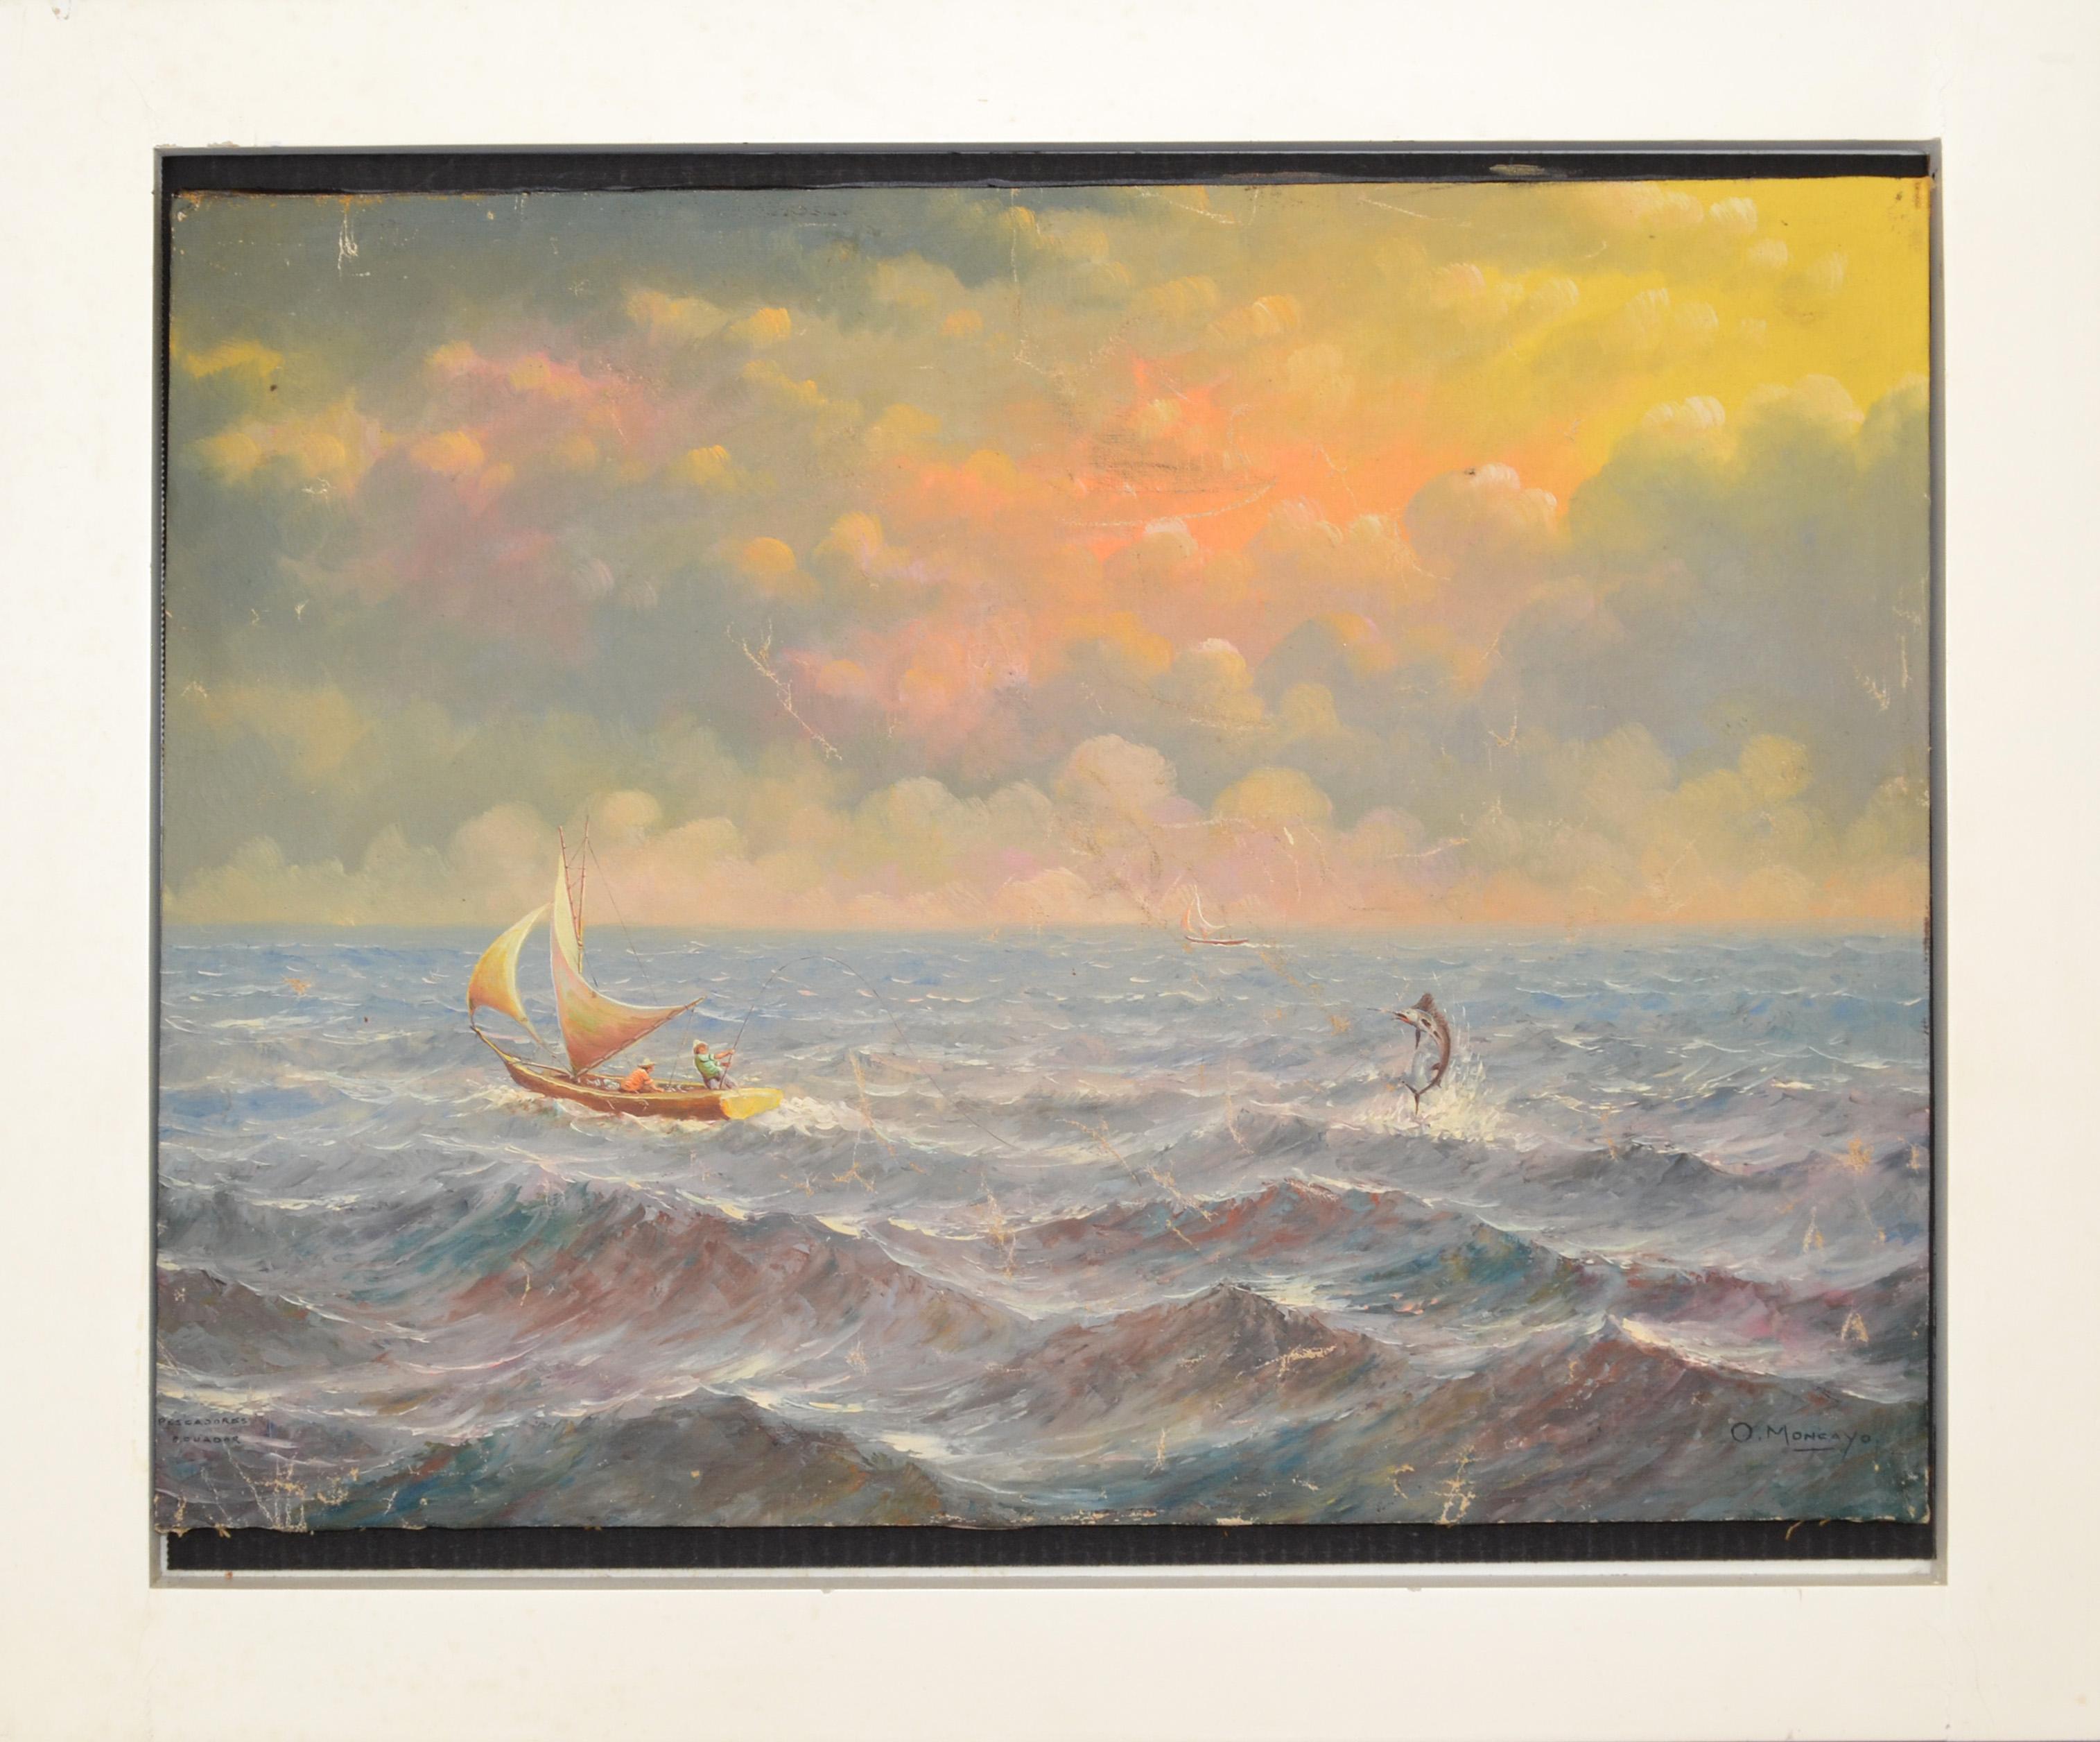 Signed and Framed Seascape Acrylic Painting on Canvas made in America circa 1970s.
Depicting two Fishermen in their Sailboat on the rough Ocean catching a swordfish.
The wide wooden Frame is lacquered in white gloss paint.
The Artist signed the